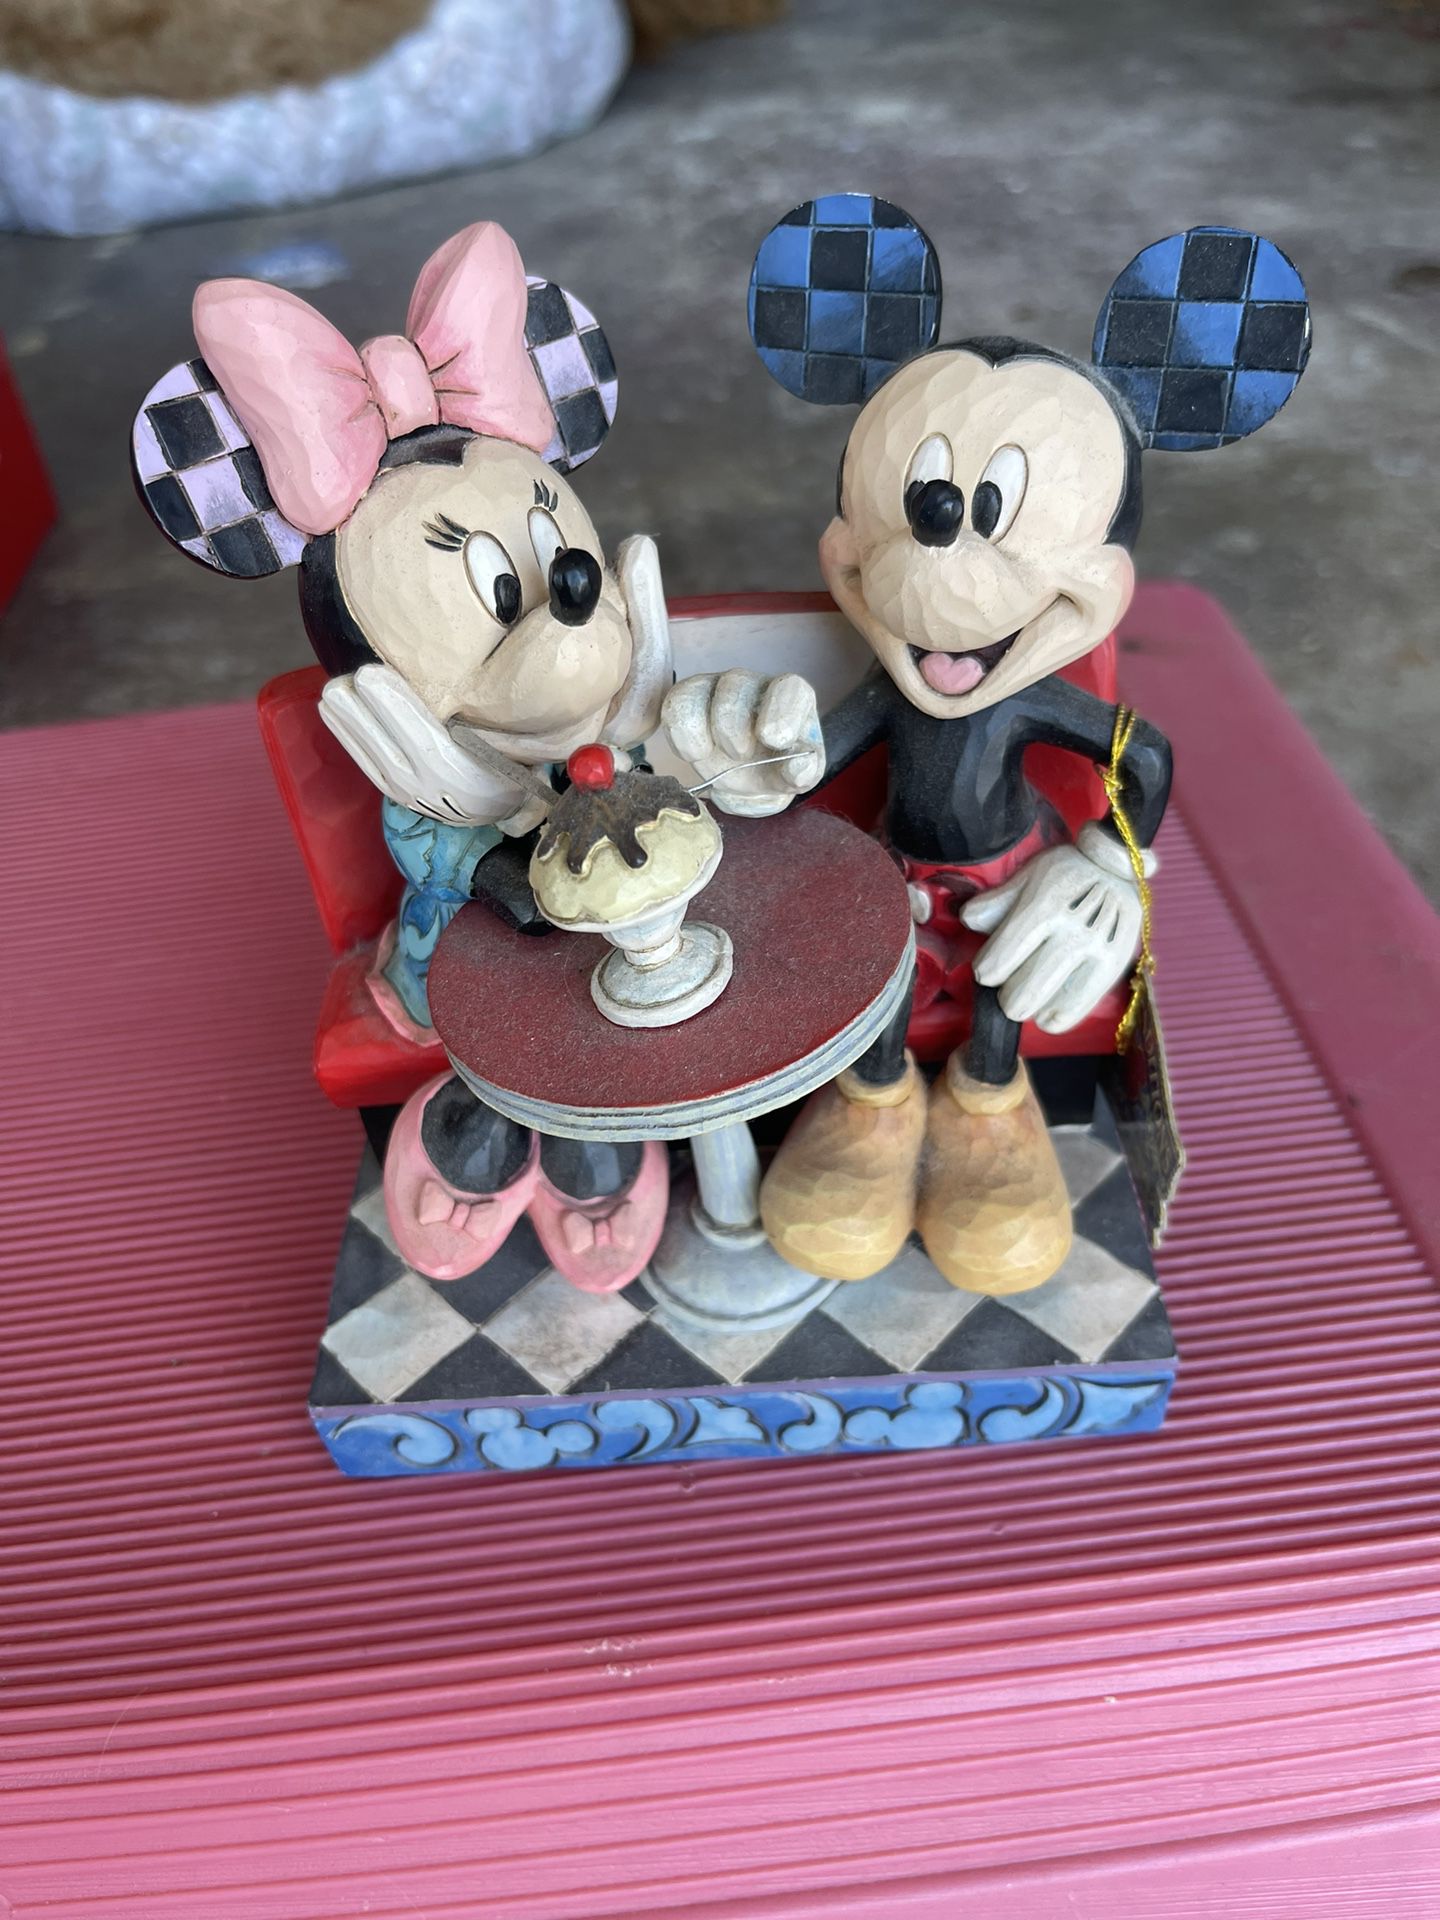 Enesco Disney Traditions by Jim Shore Mickey and Minnie Mouse Soda Shop Figurine